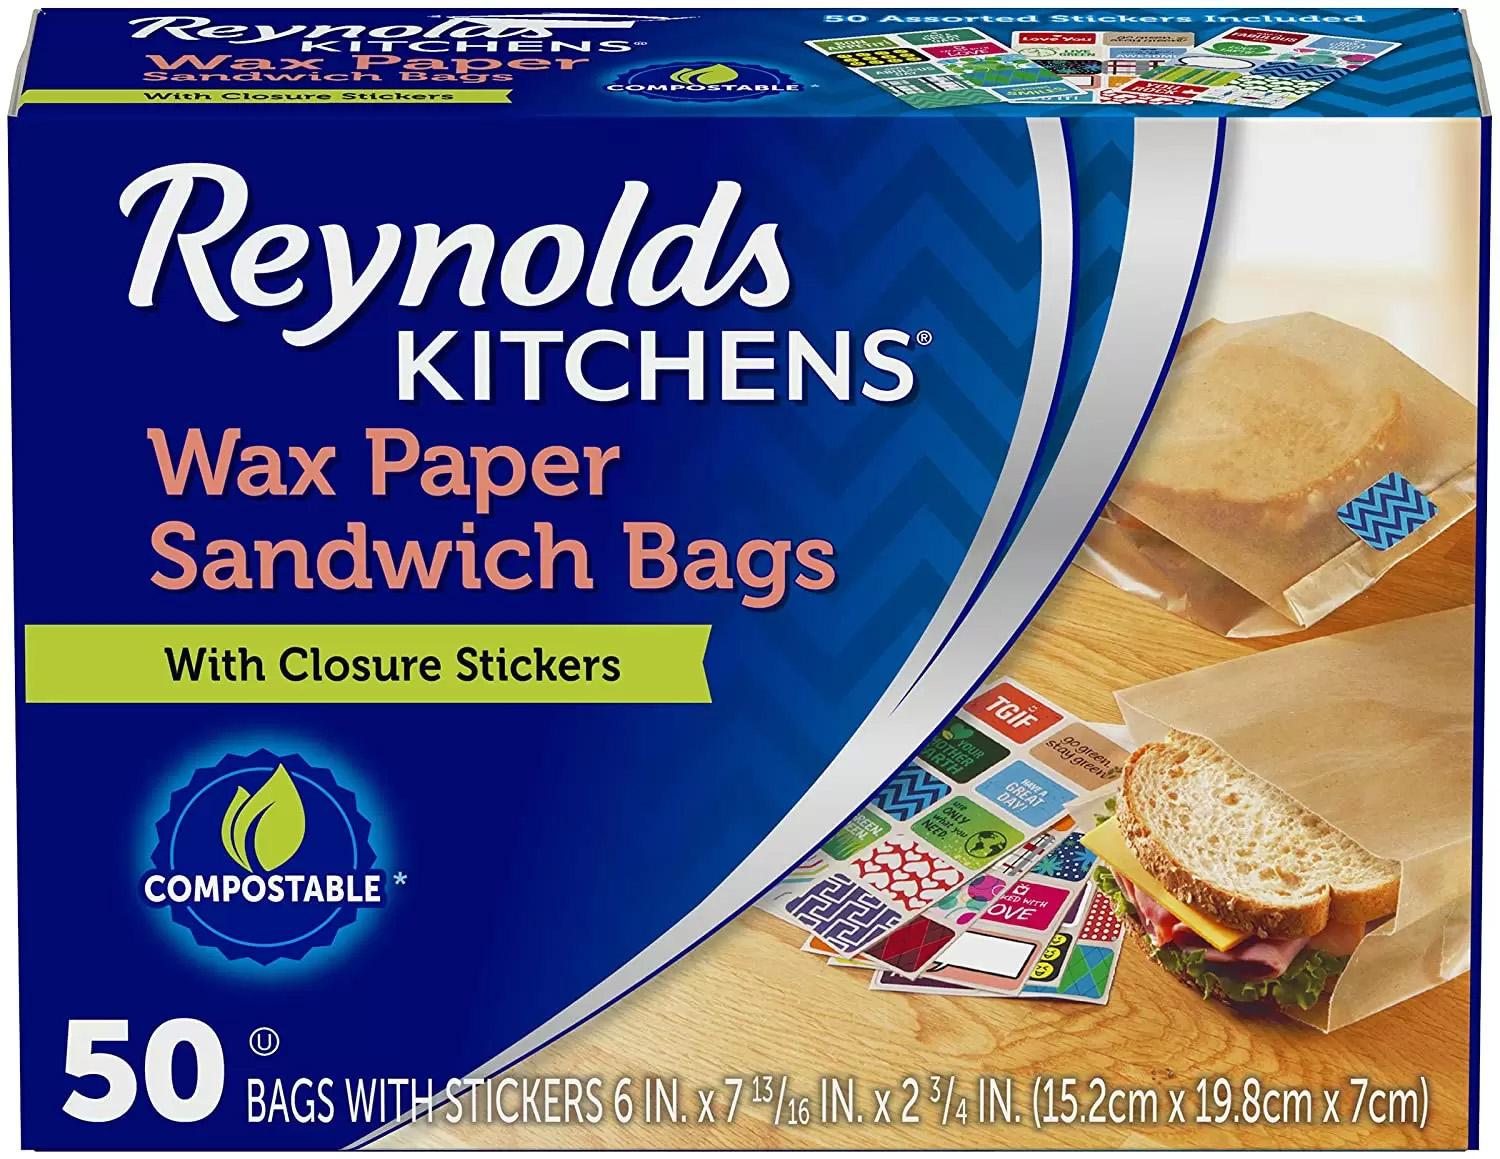 Reynolds Kitchens Wax Paper Sandwich Bags for $2.59 Shipped